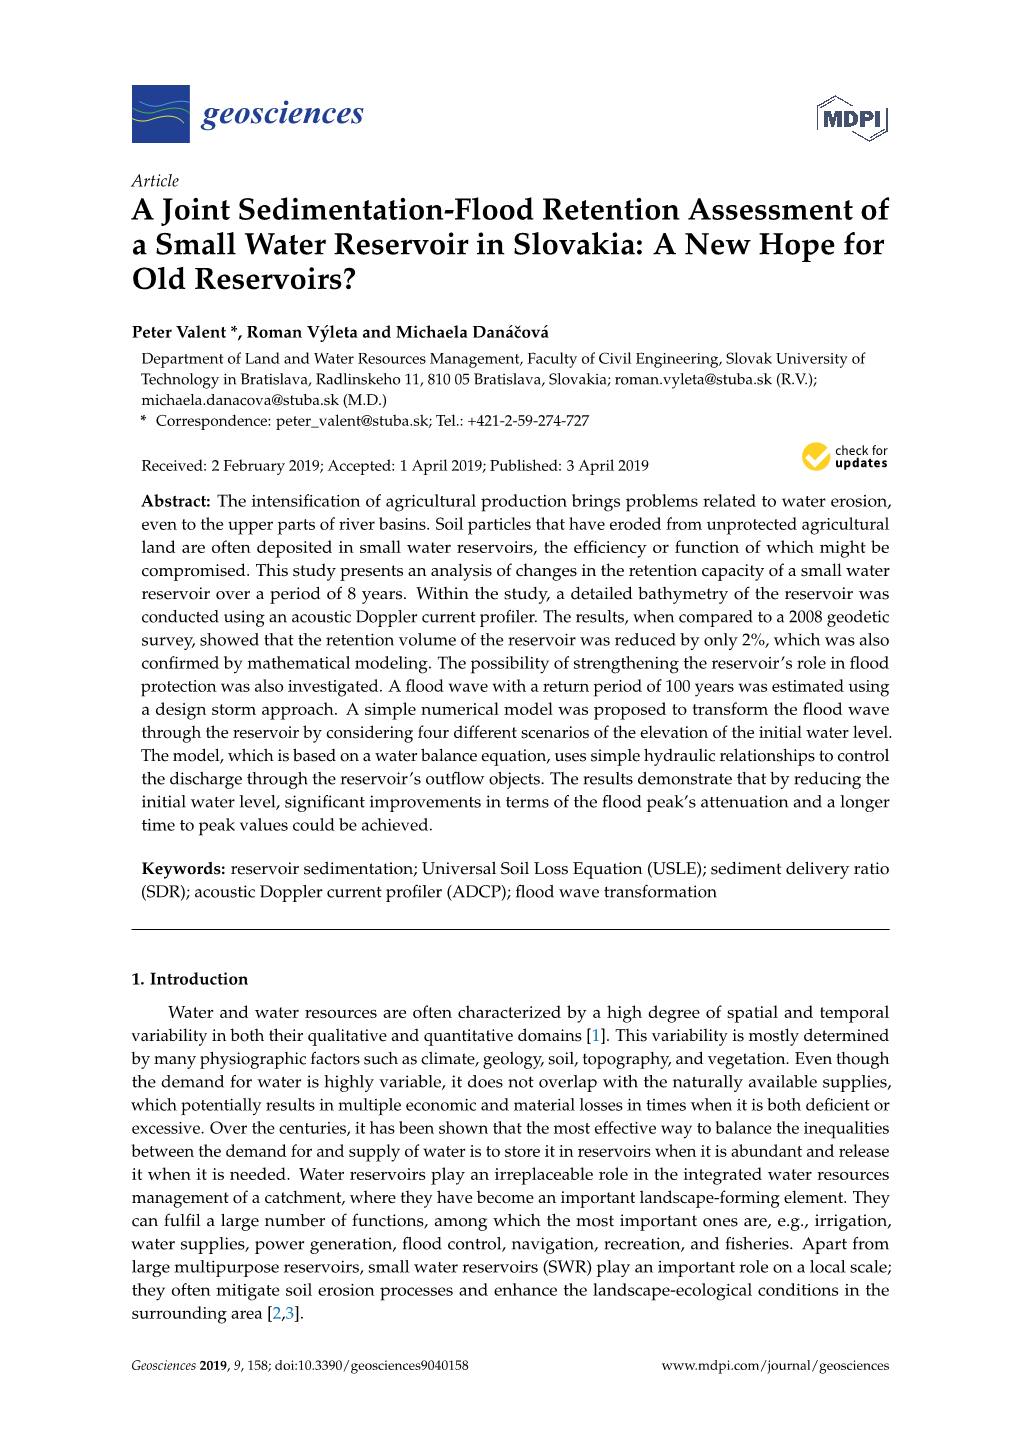 A Joint Sedimentation-Flood Retention Assessment of a Small Water Reservoir in Slovakia: a New Hope for Old Reservoirs?